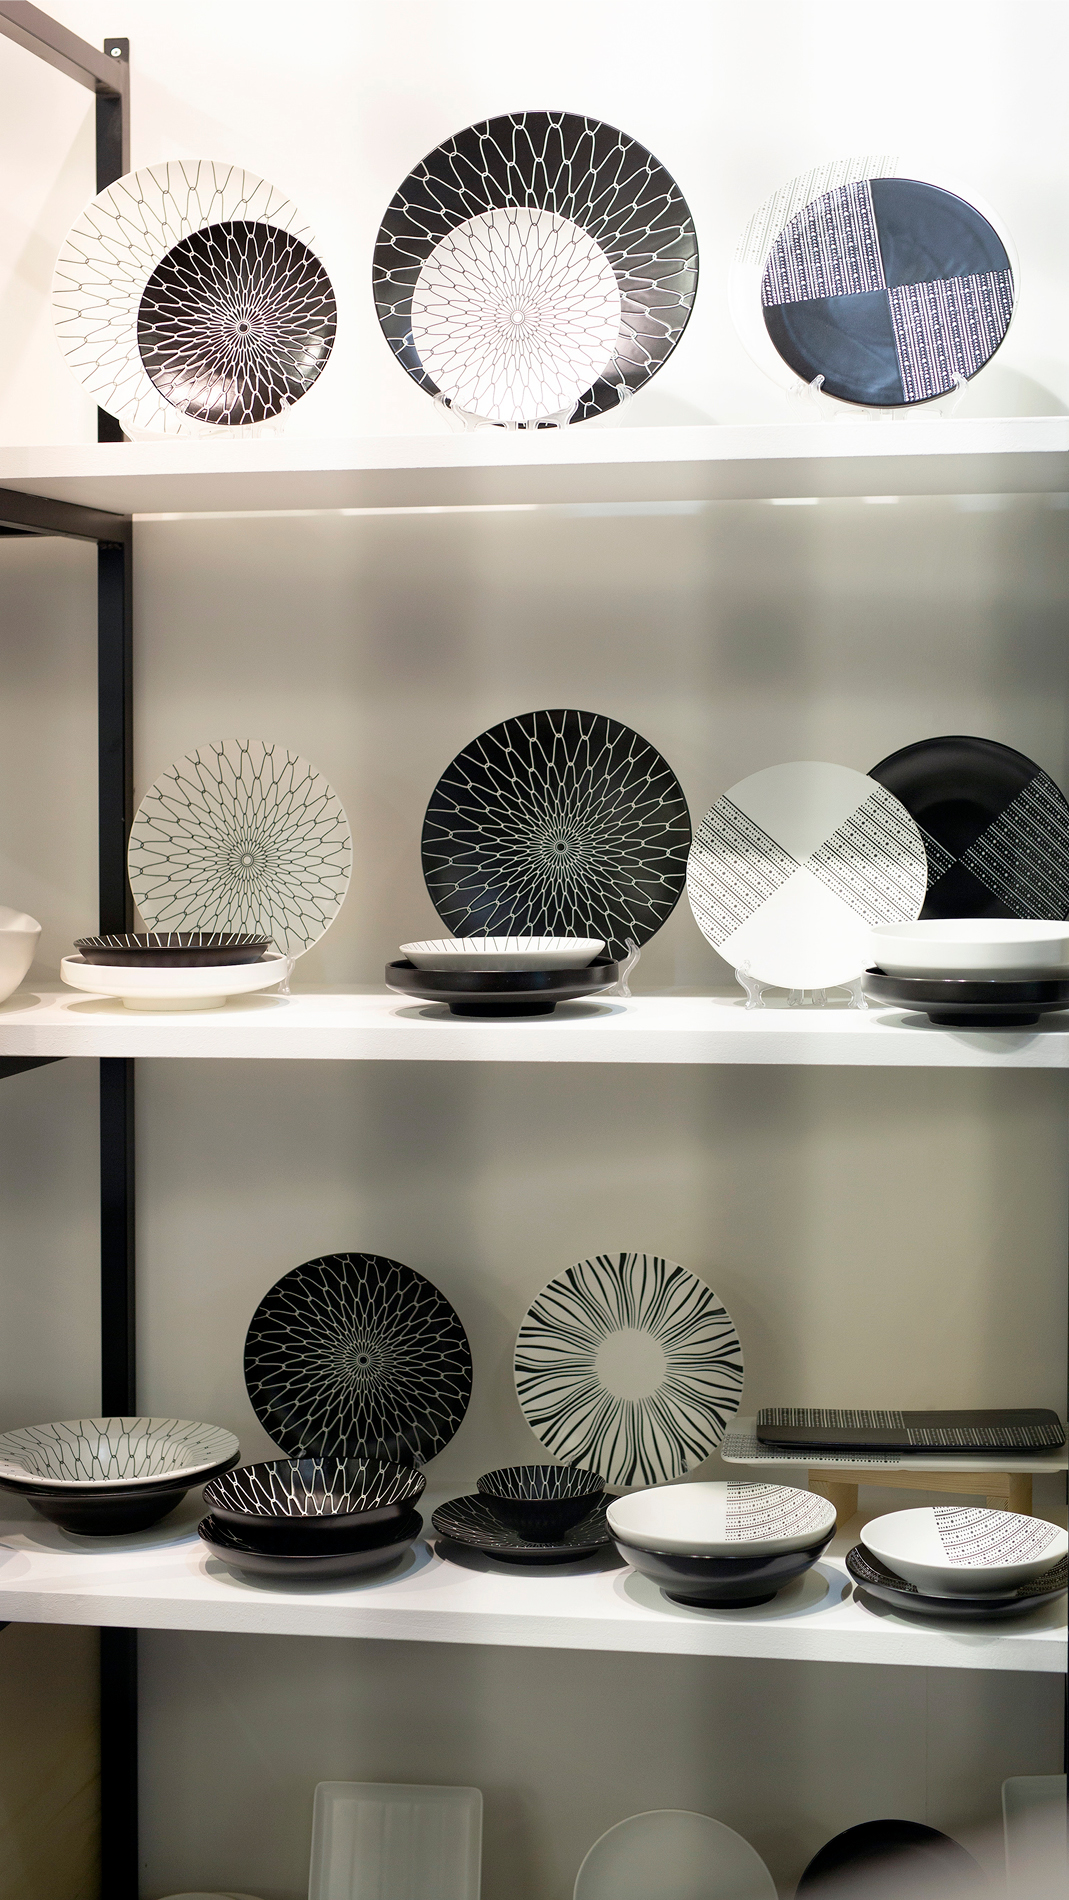 Plates and bowls at Ambiente